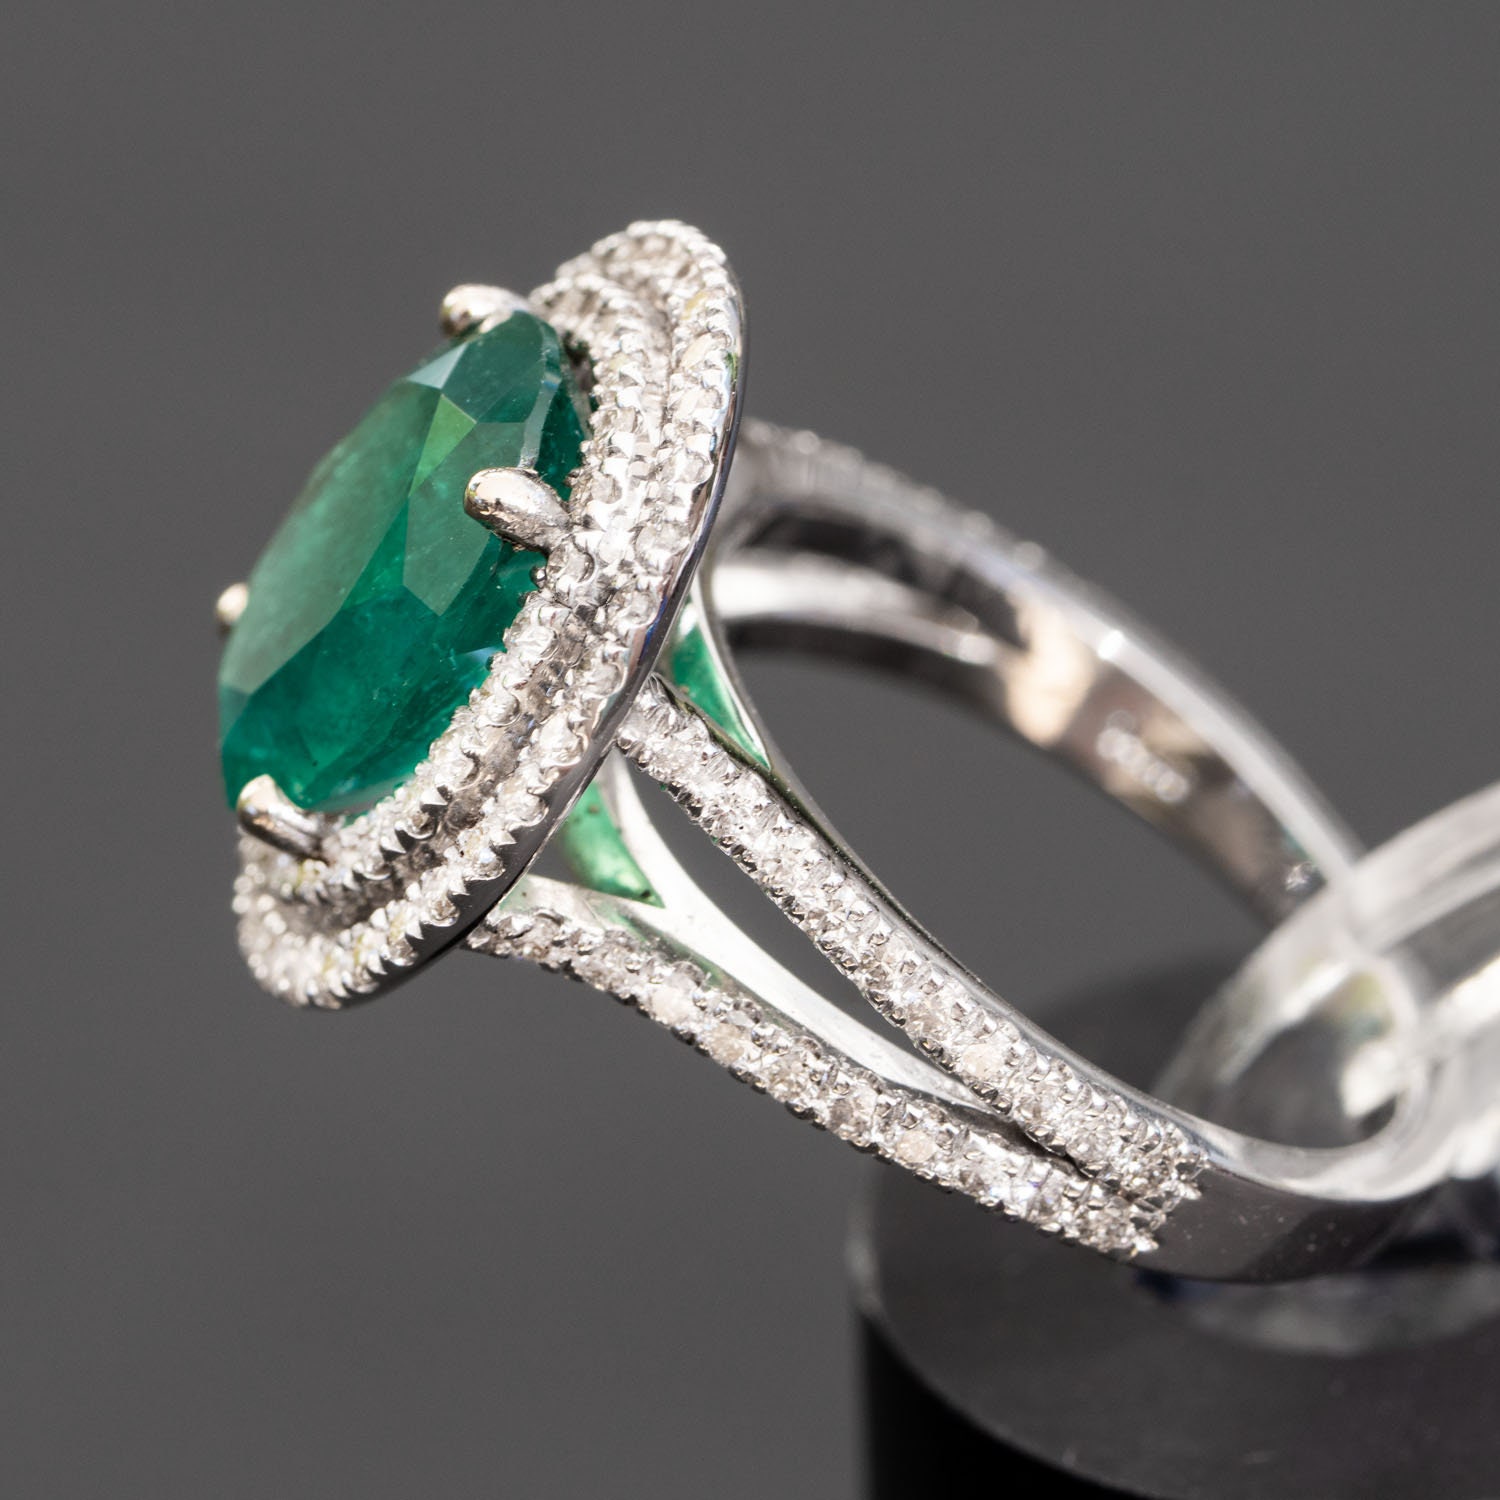 Emerald Engagement Ring in 14K White Gold 3.90 Carat Natural - Etsy